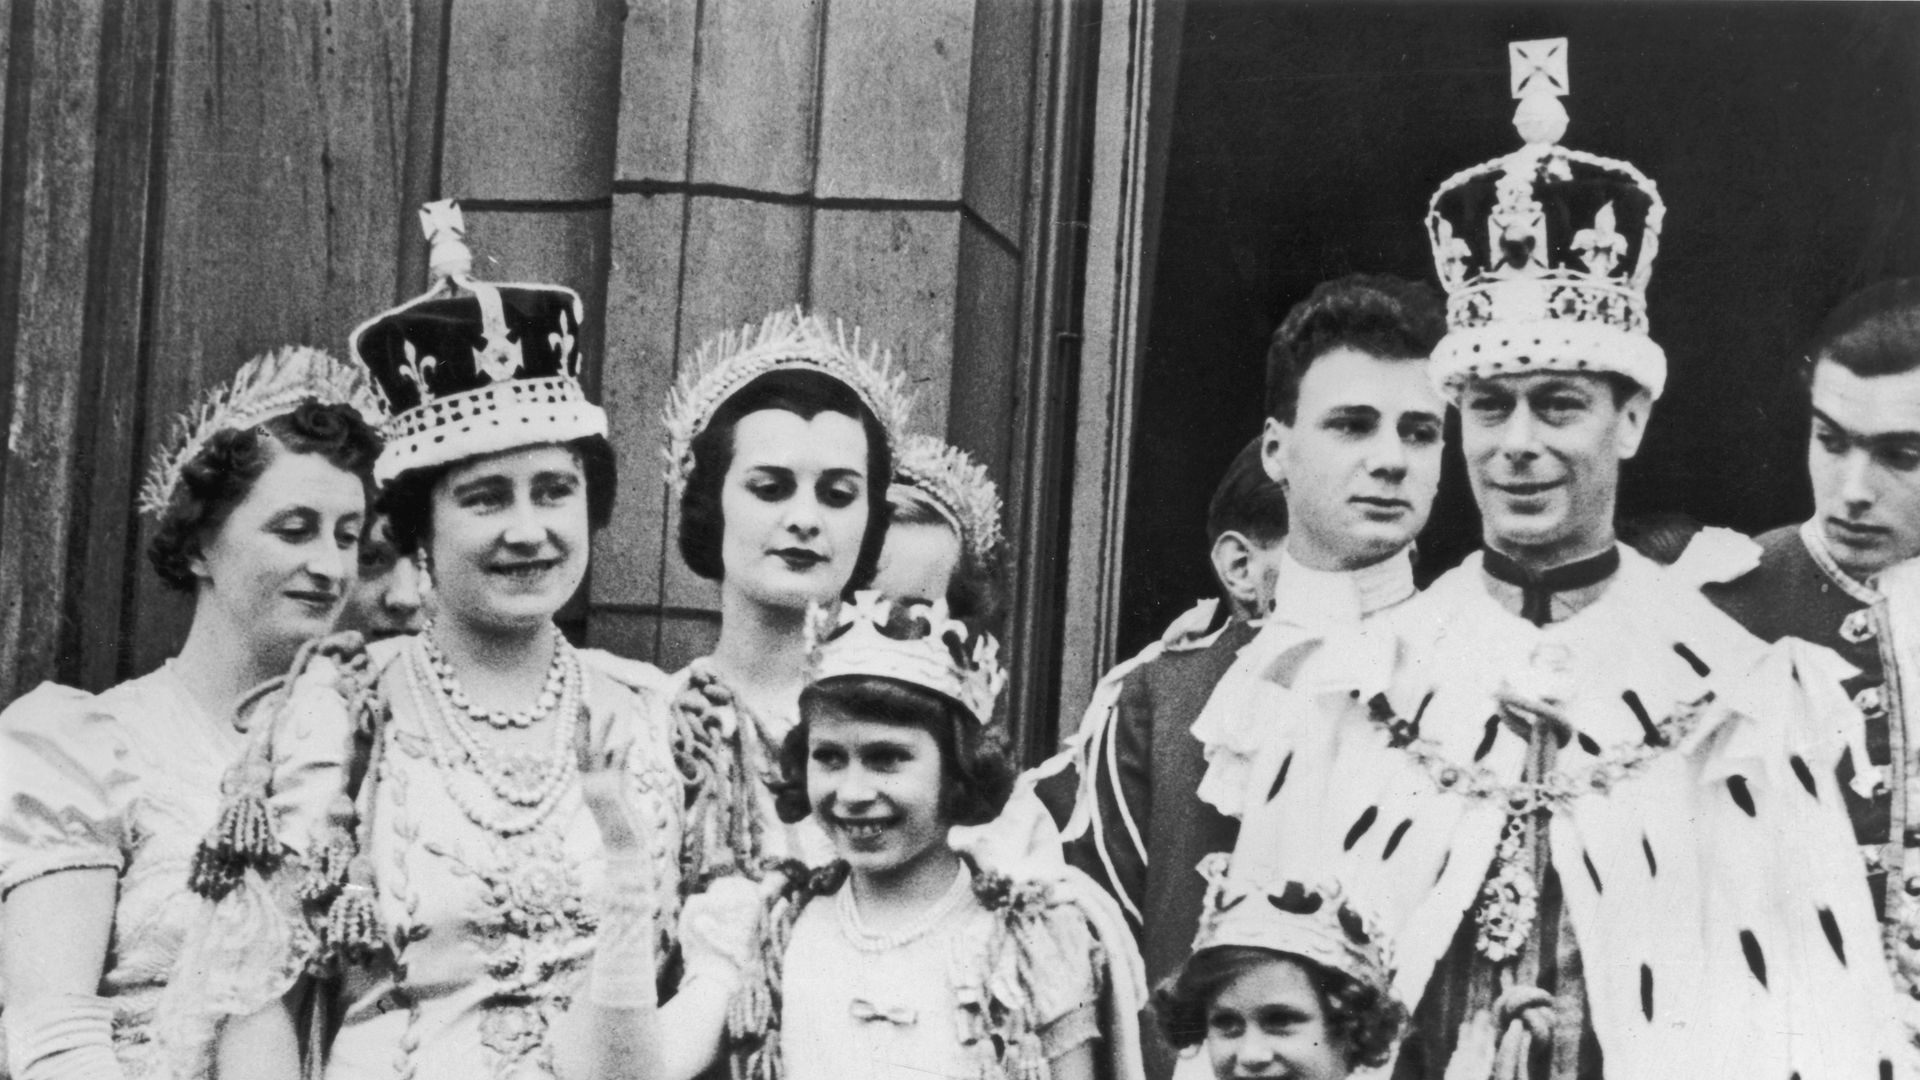 The Queen Mother, the Queen, Princess Margaret and King George VI on the Buckingham Palace balcony after the latter's coronation